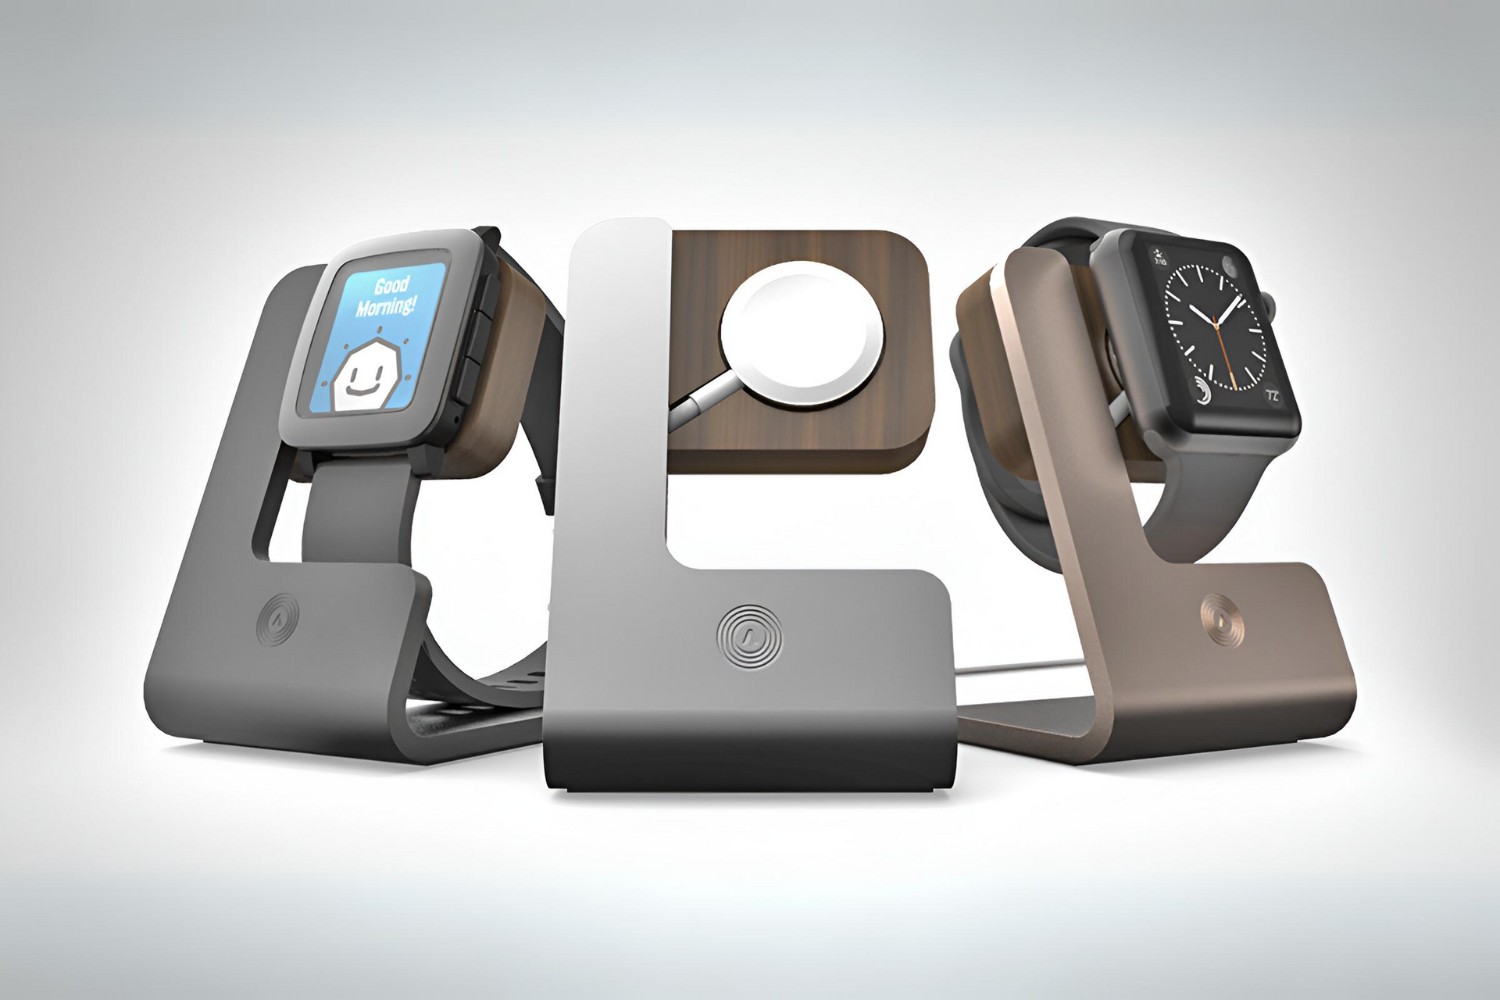 Why Was The “Pebble Time” Campaign Successful On Indiegogo?